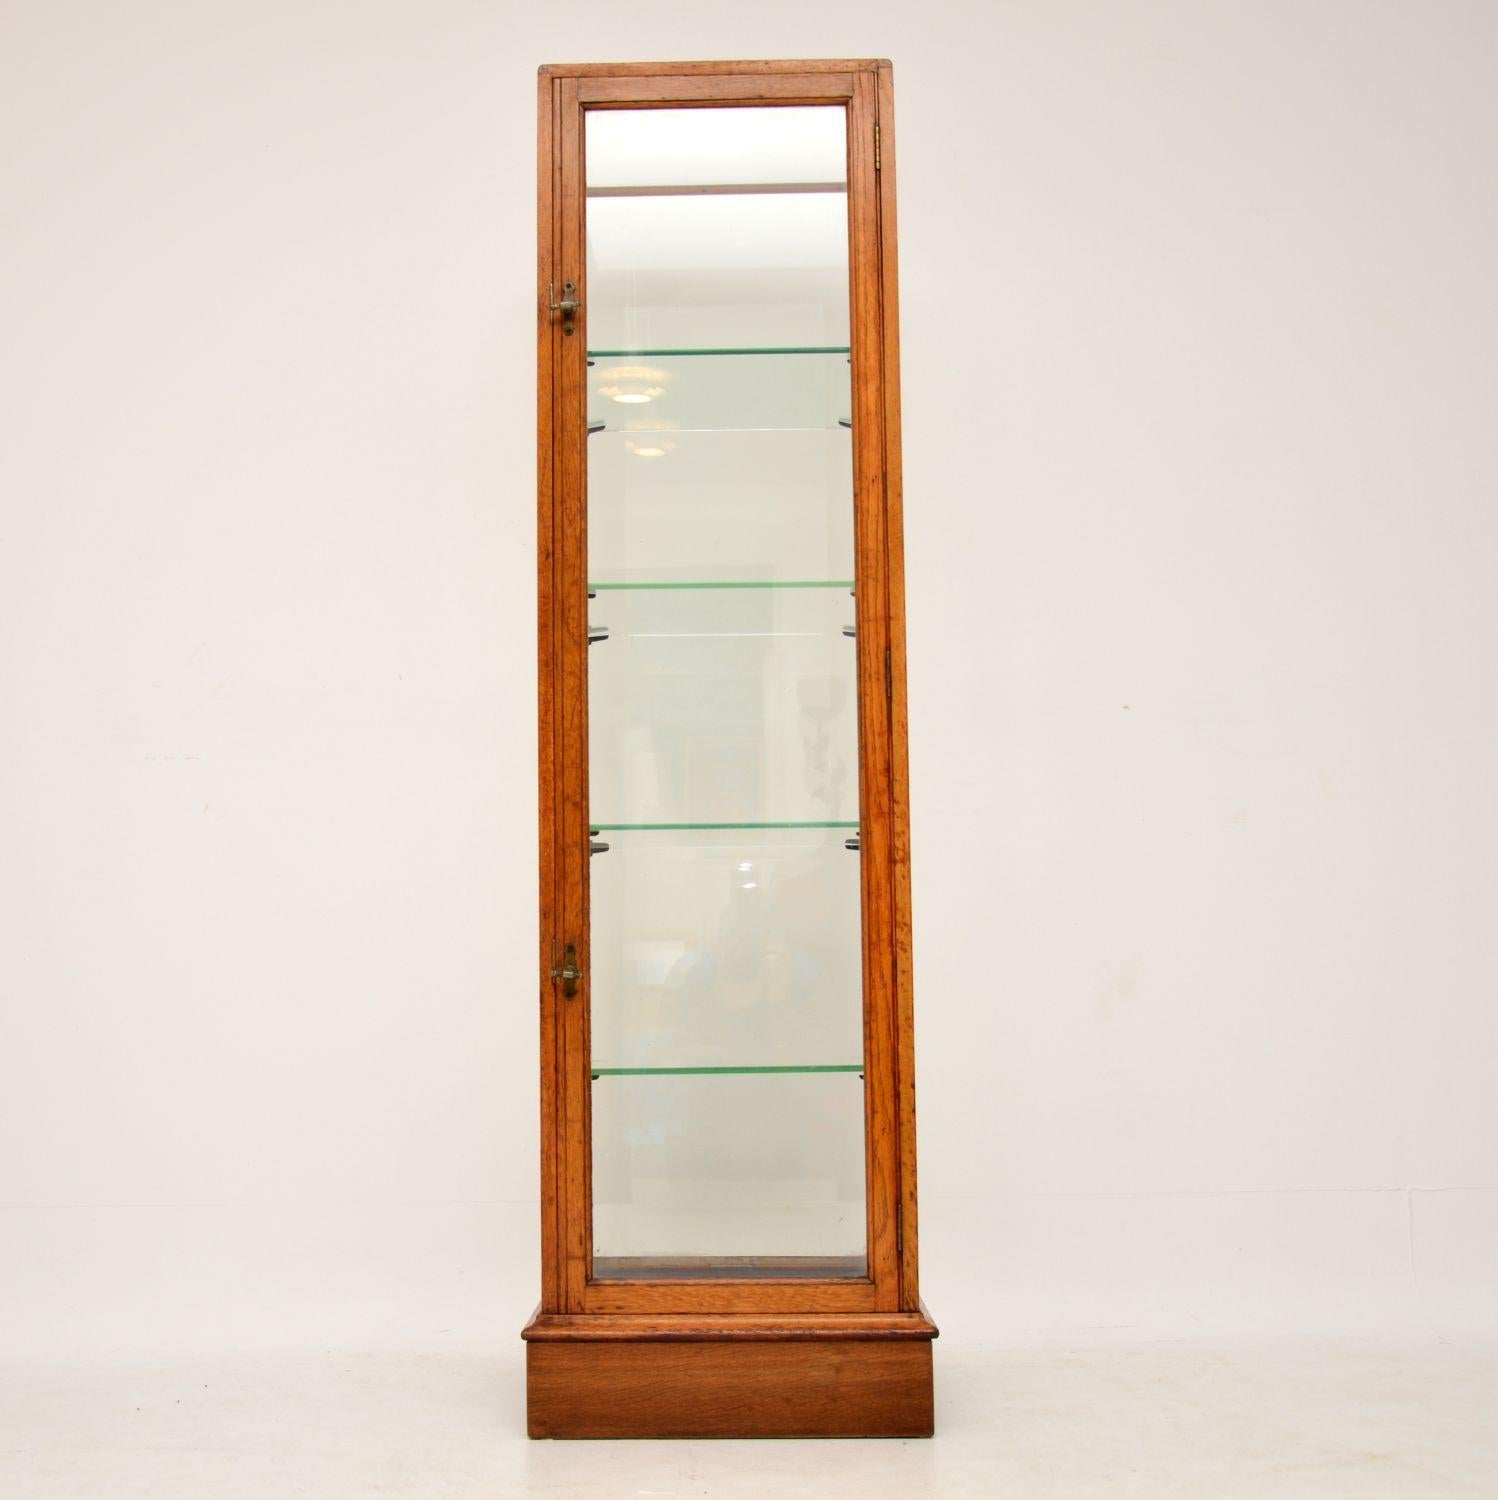 Fine quality antique Victorian solid mahogany showcase in excellent original condition. I believe it was possible made as a shop fitting, but because it’s quite small, it would work well in the home. The cabinet makers F. Maund & E. Berg were well